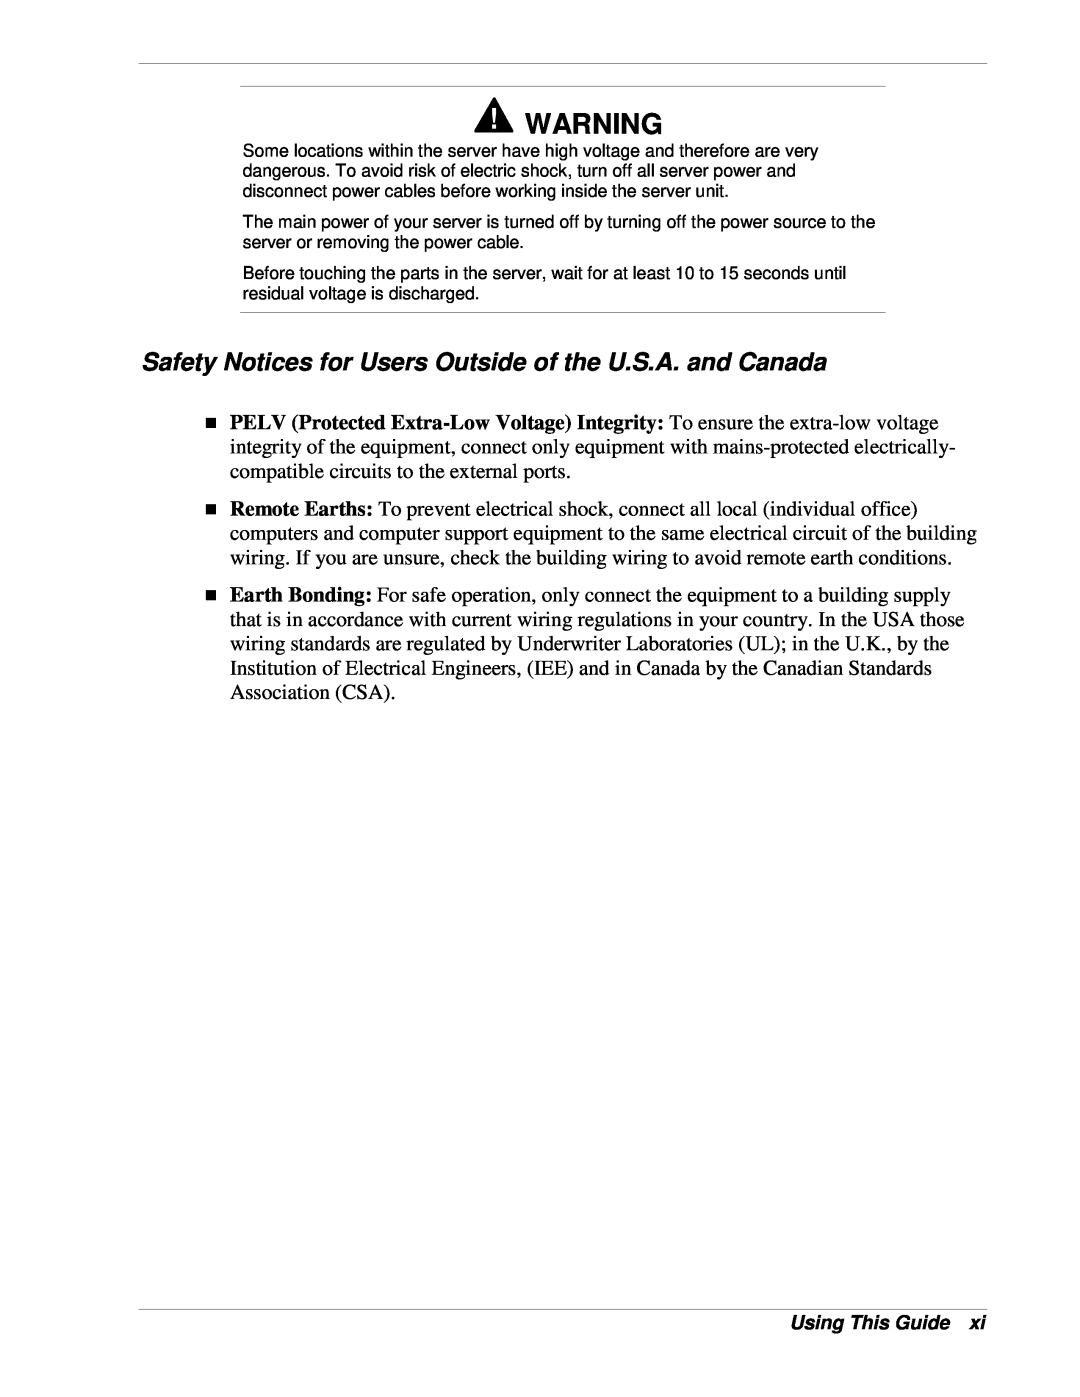 NEC 1080Xd manual Safety Notices for Users Outside of the U.S.A. and Canada 